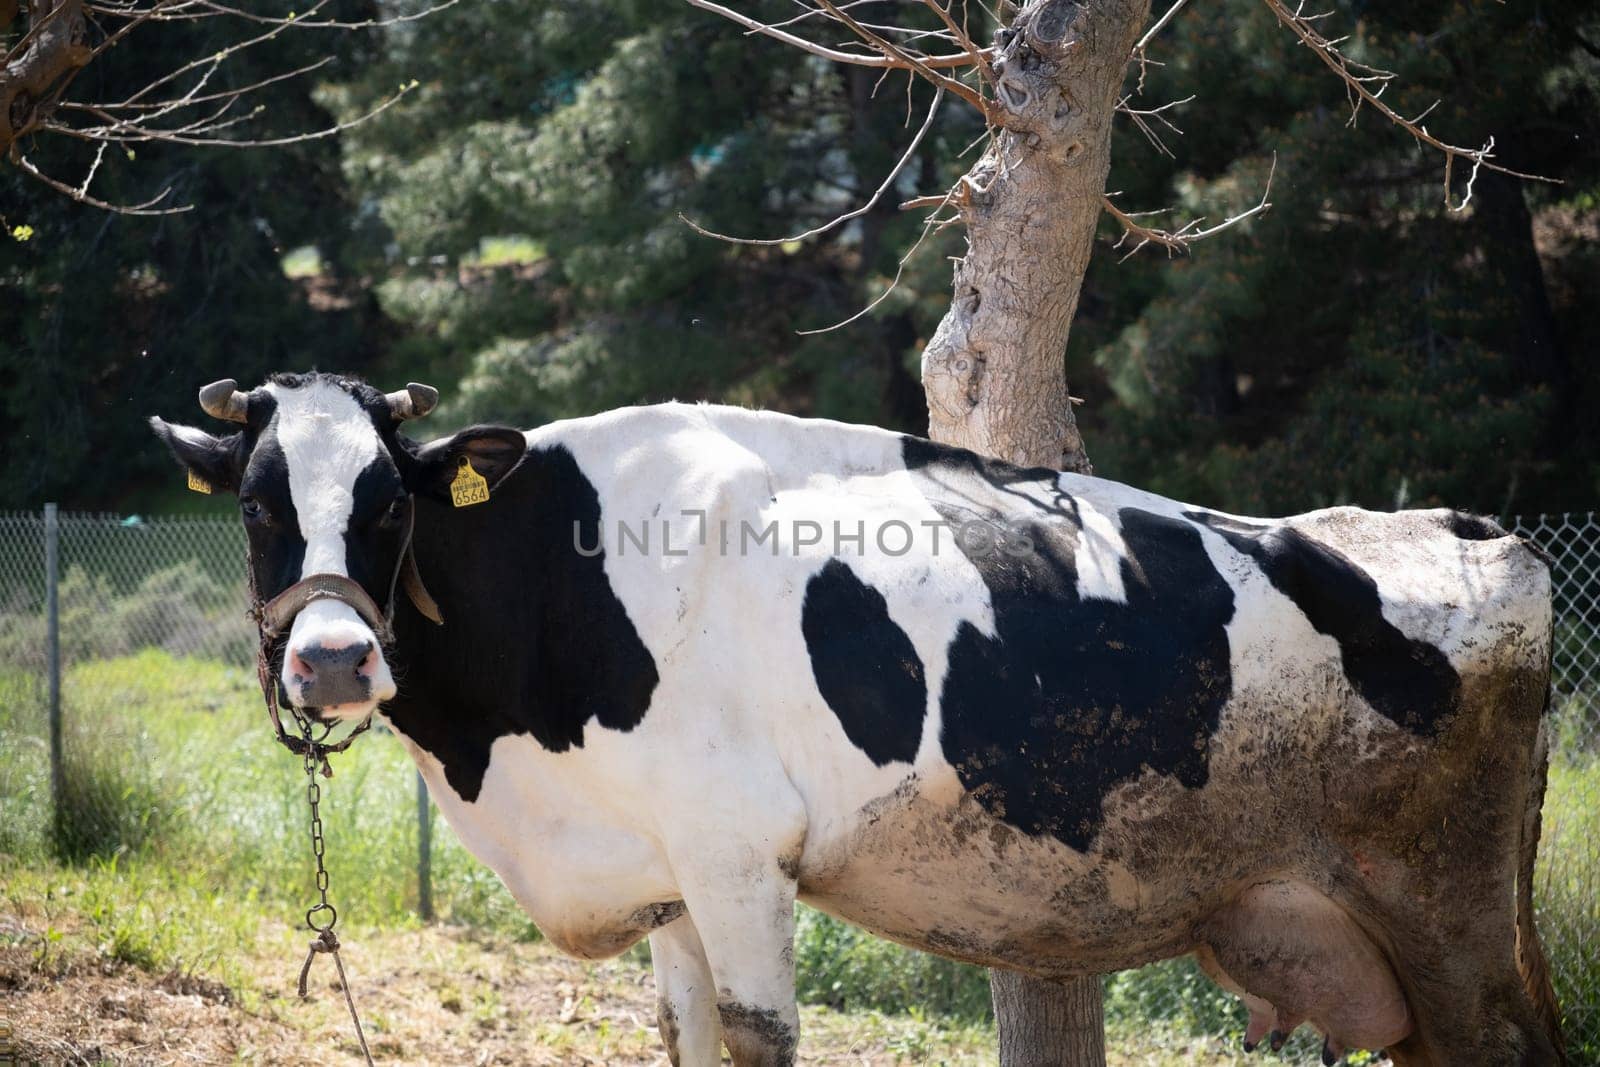 cows graze on a green field in sunny weather. HQ